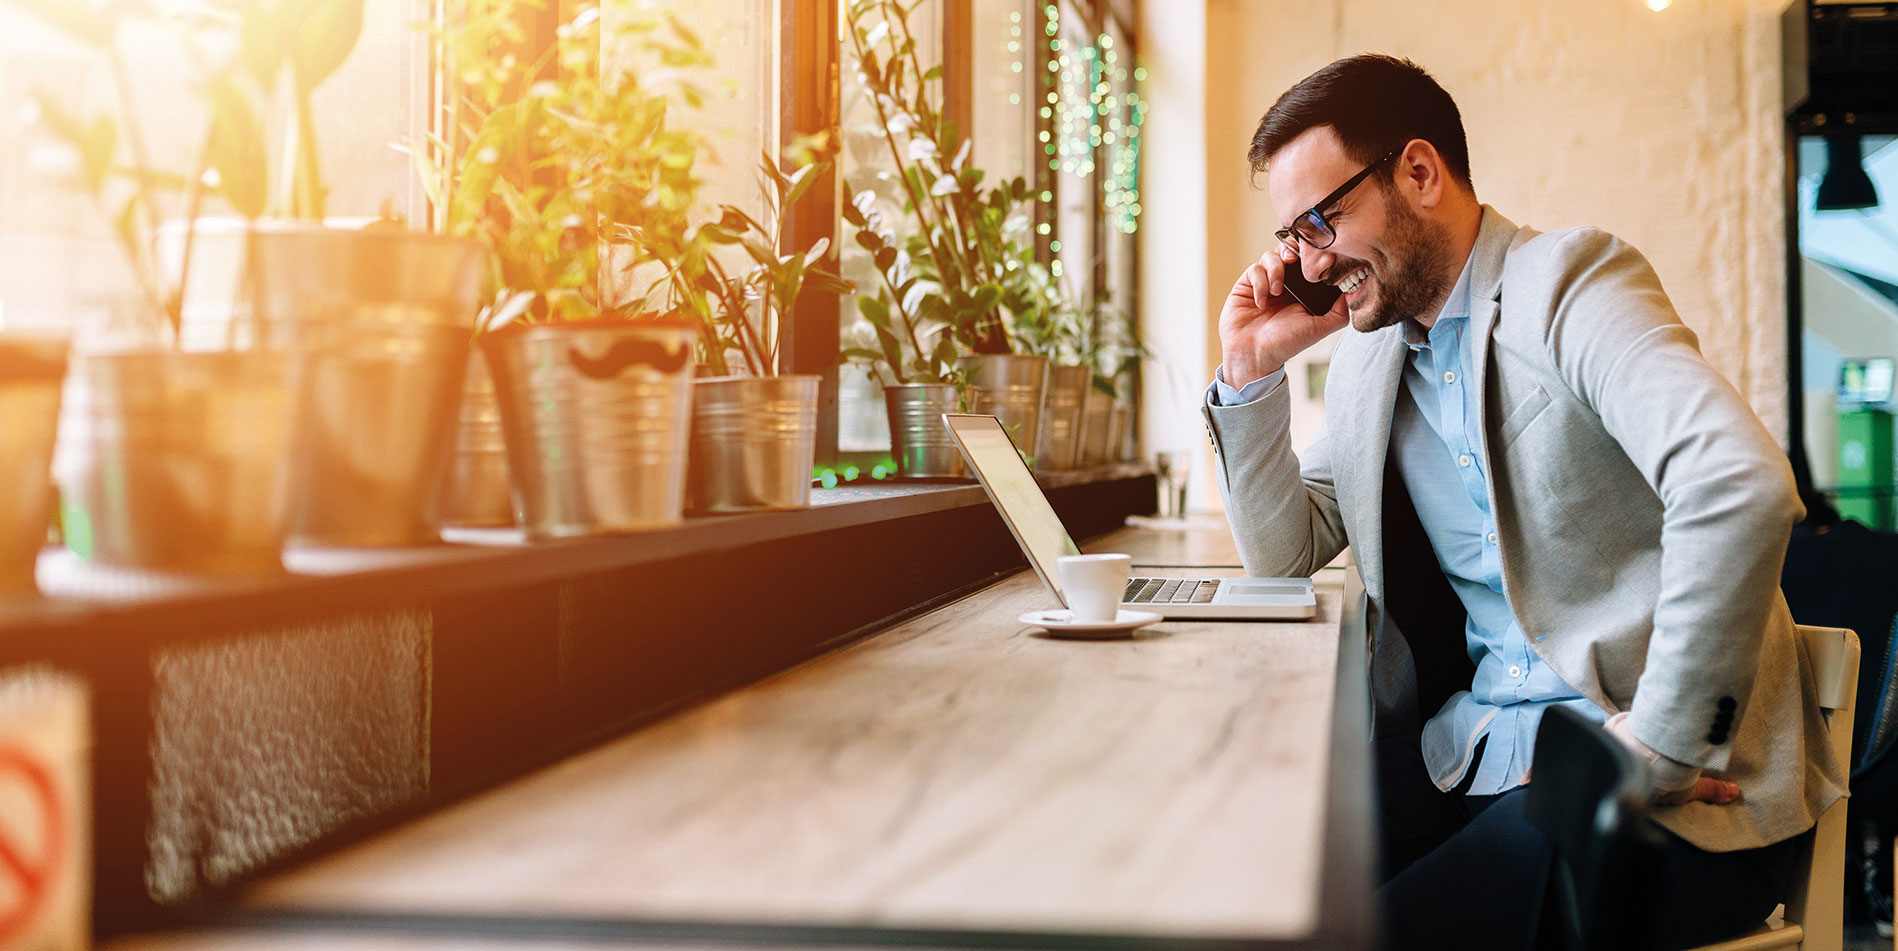 Man sitting at a desk on the phone. Bupa Global launched its second Executive Wellbeing Index on 20 September 2021